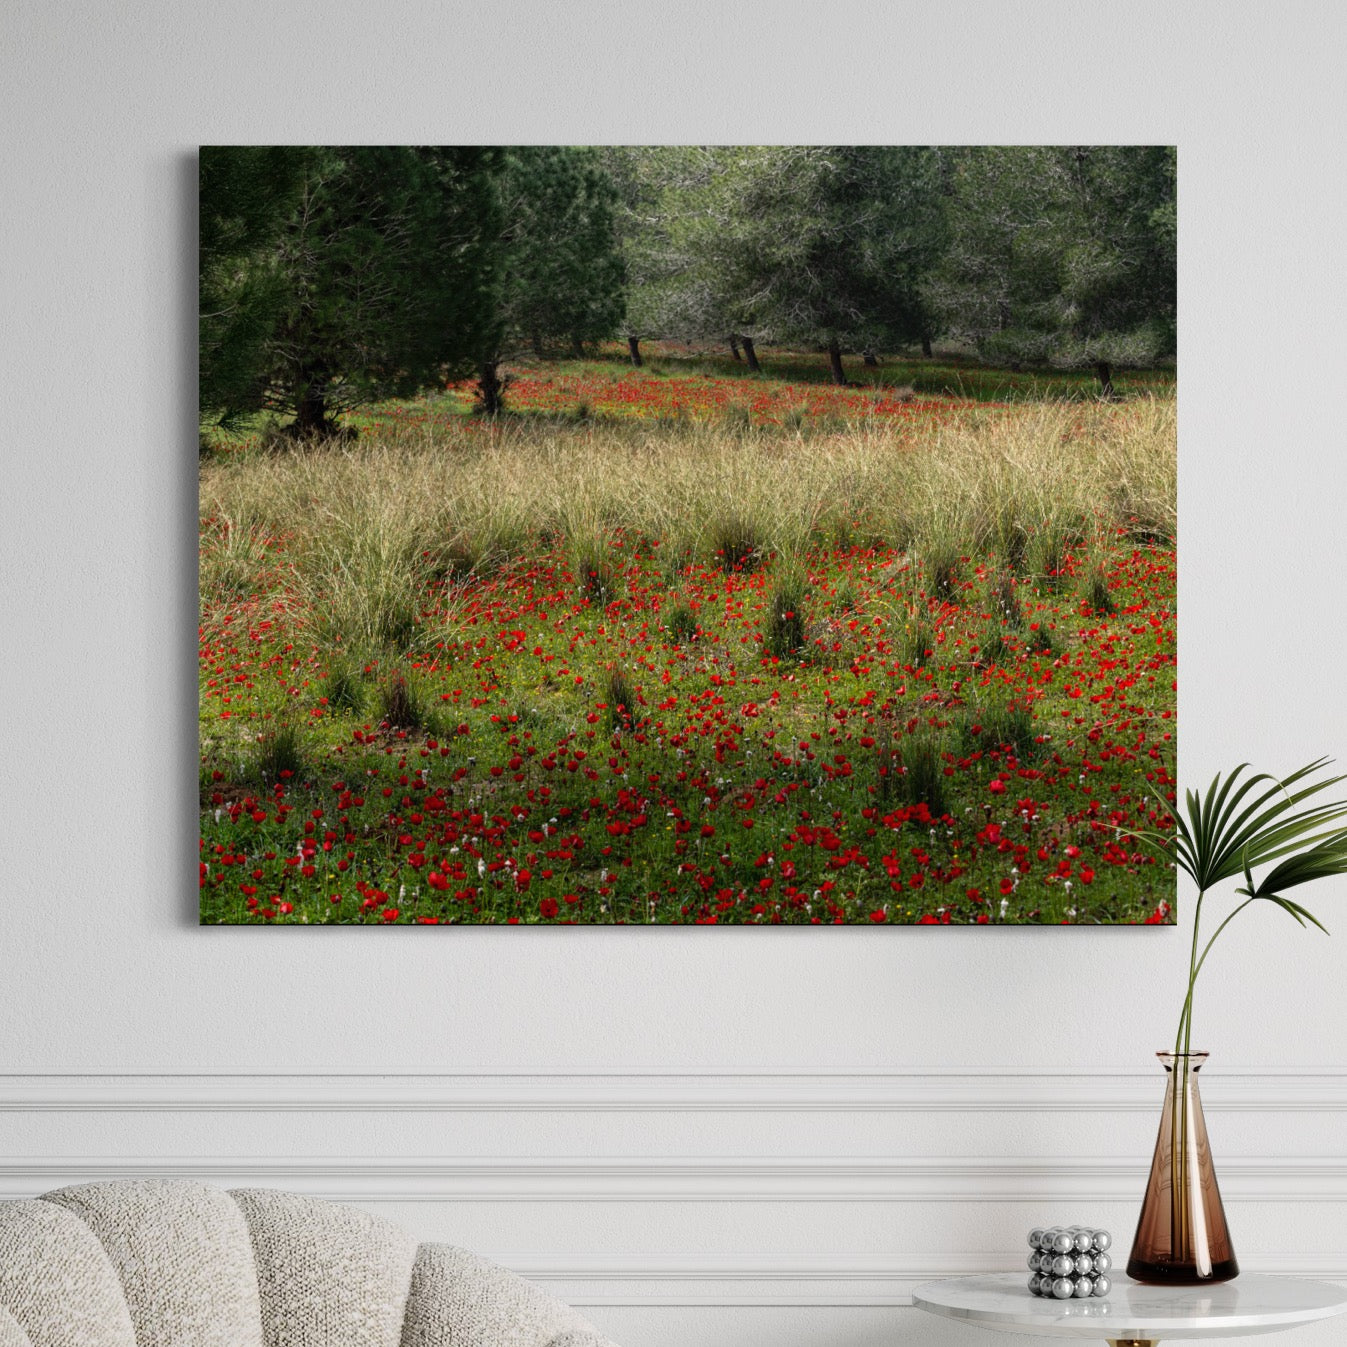 Ela Valley Anemones by Yehoshua Halevi - Photograph on Glossy Acrylic (French Cleat Hanging)